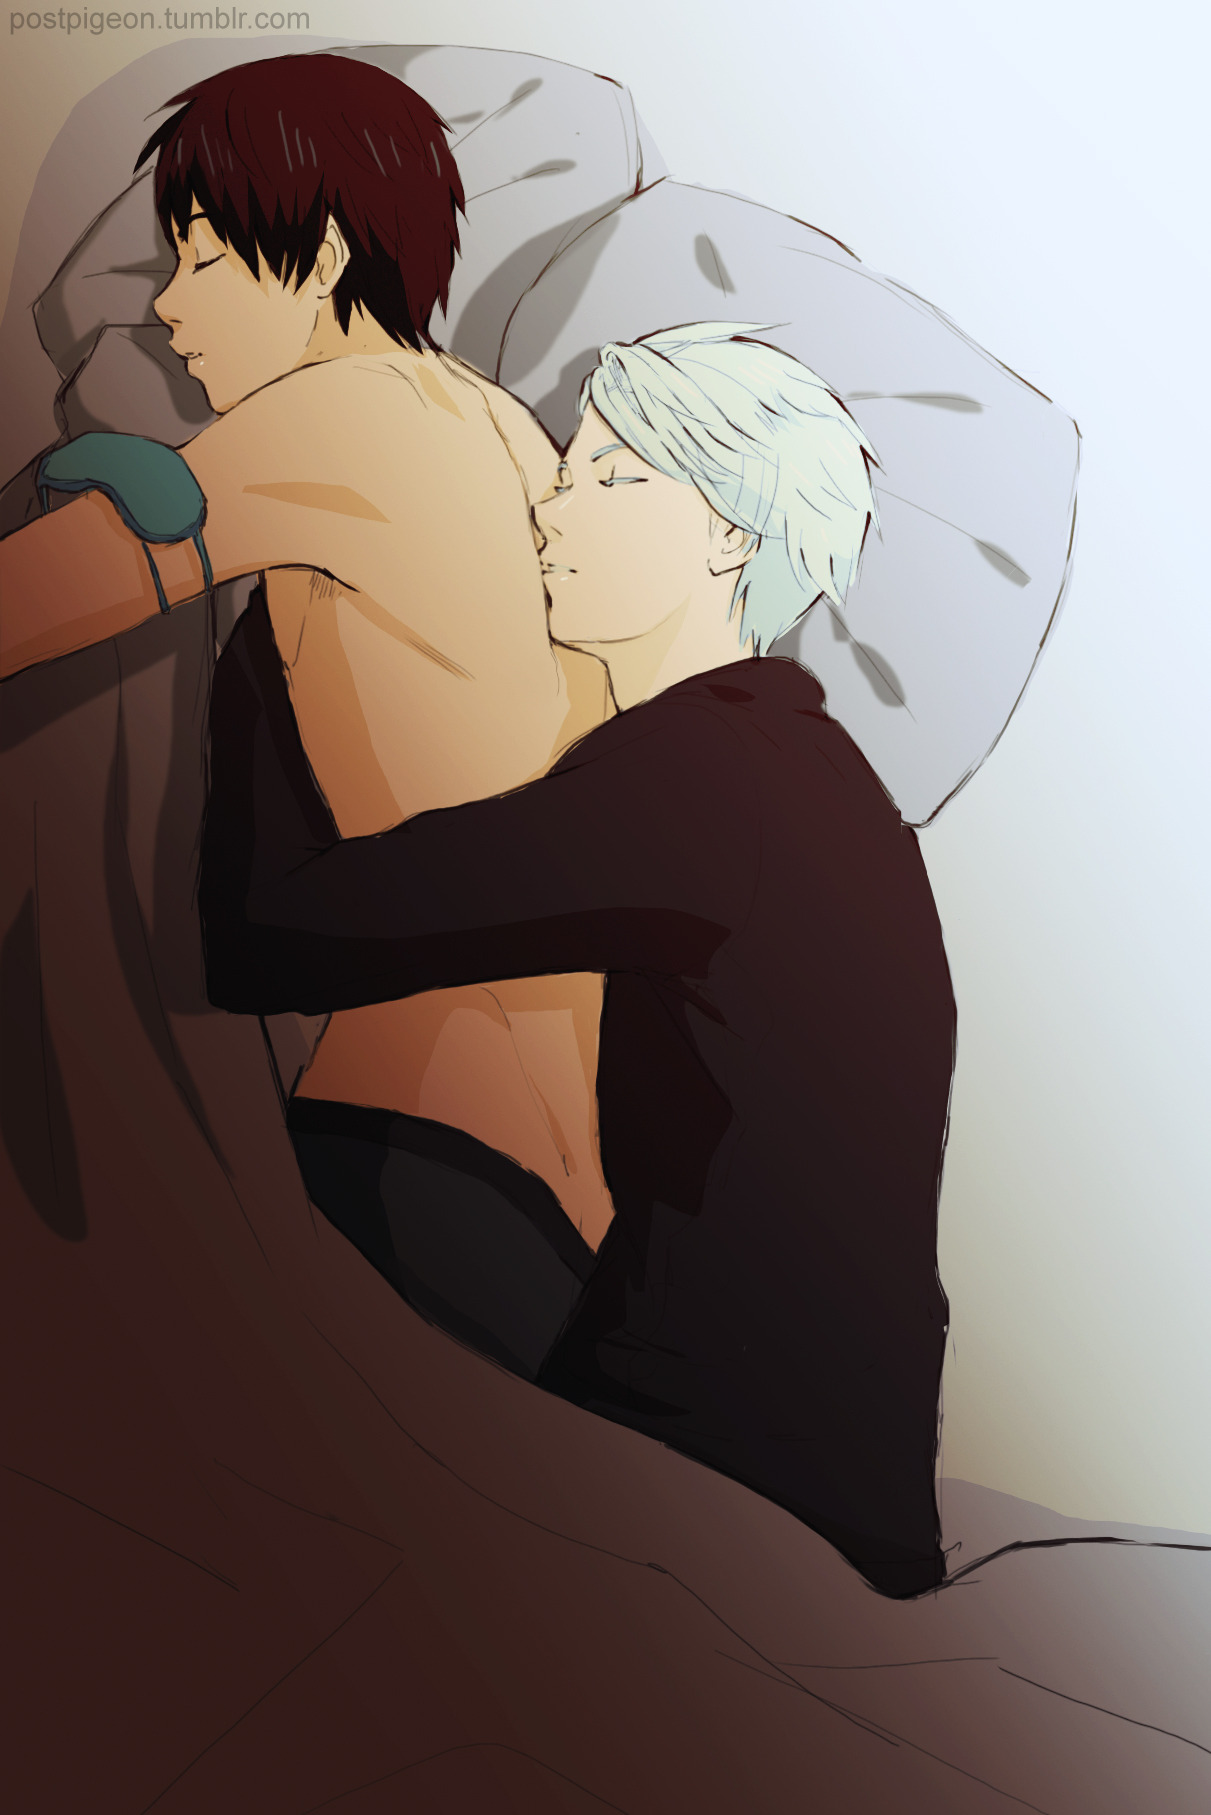 postpigeon:Okay! We all remember how Yuuri and Victor slept together  in episode